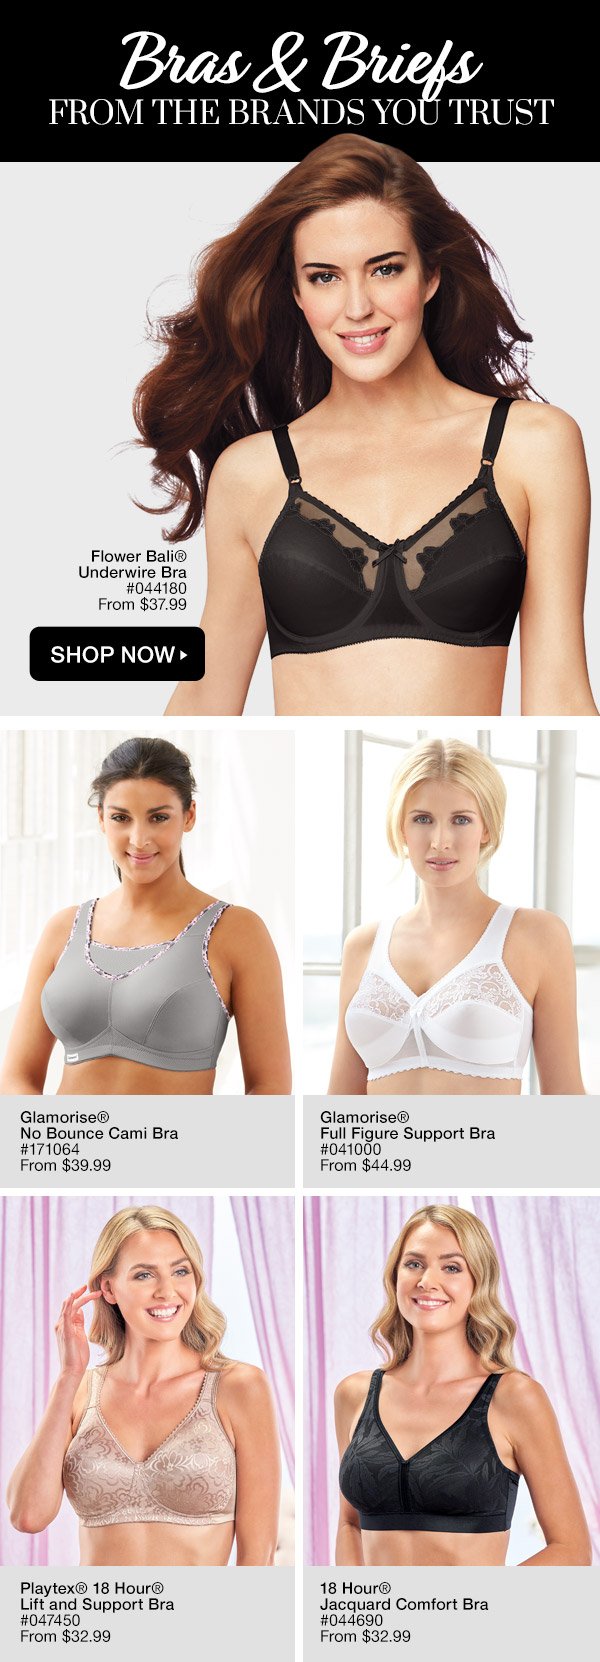 amerimark: Bras & Briefs from the Brand You Trust